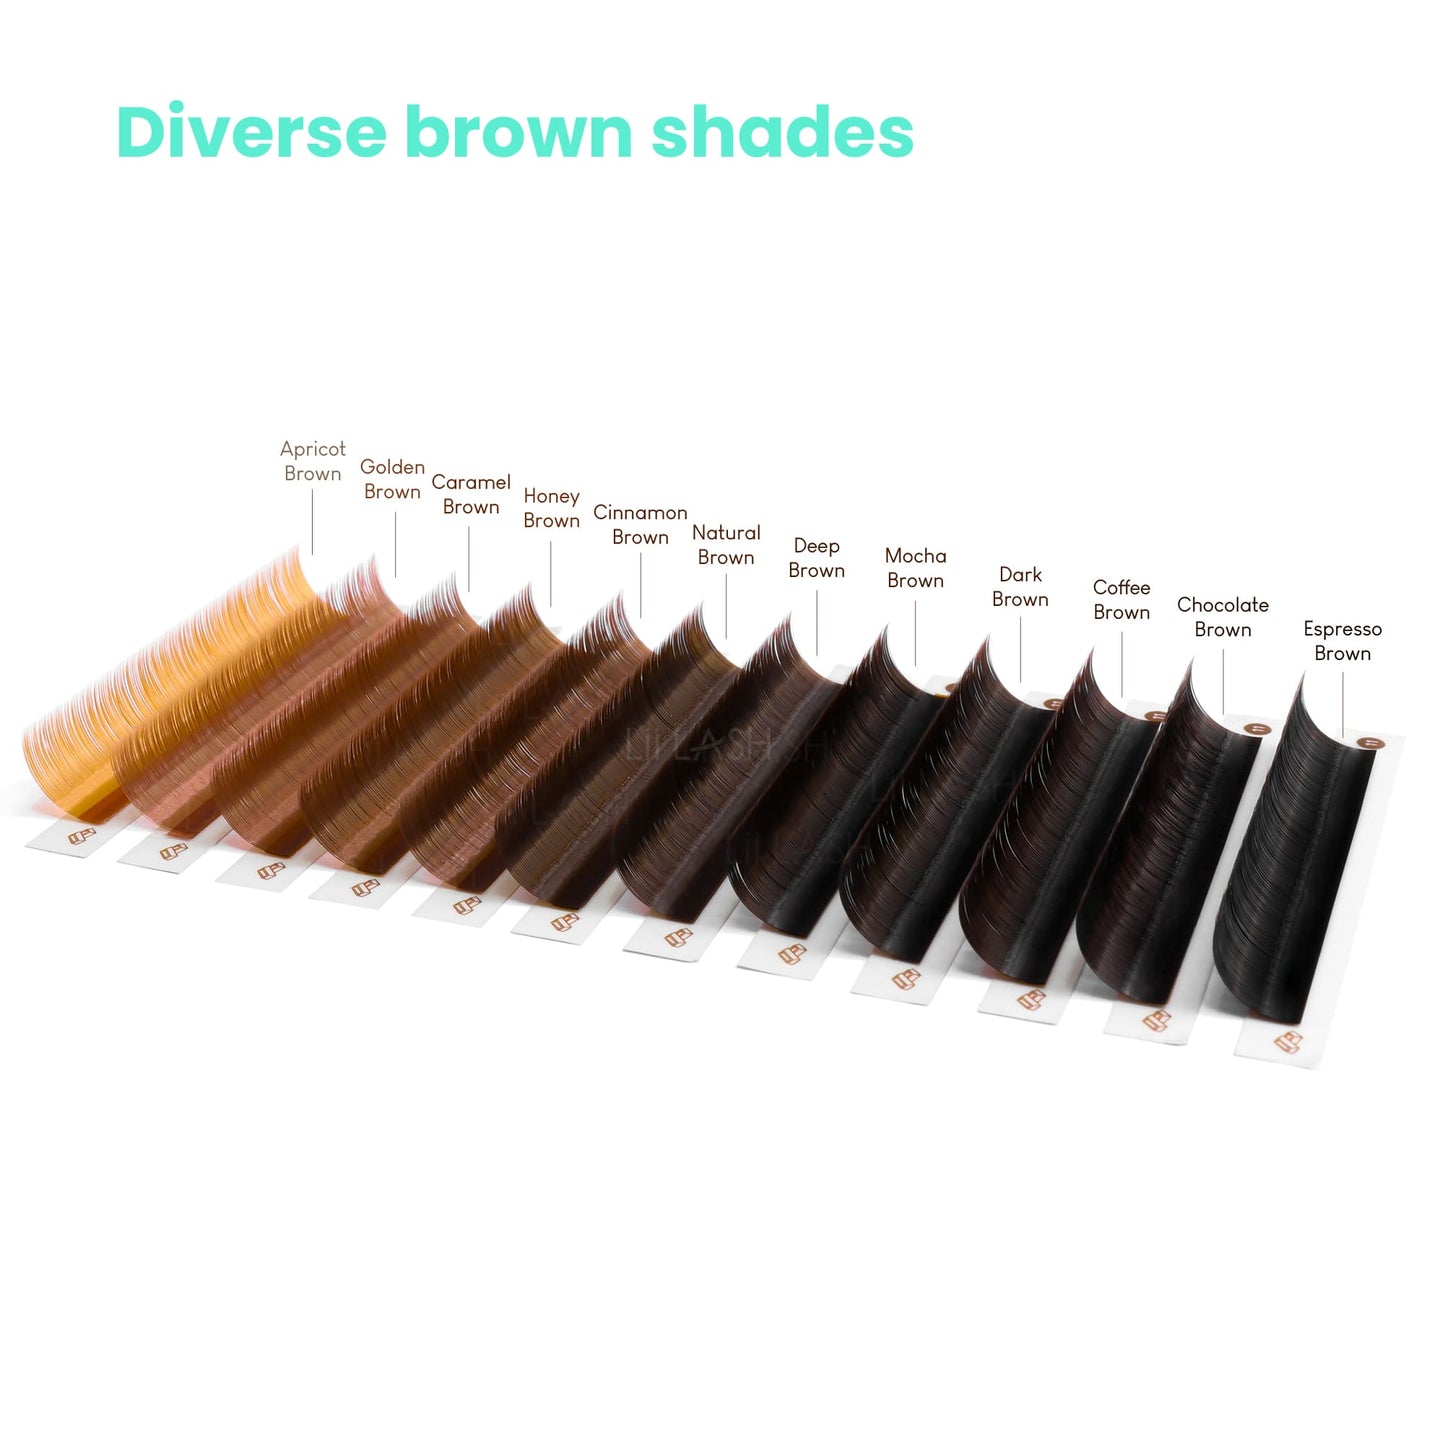 Lineup of Lii Lash's 12 brown lash extension shades, offering a spectrum from light to dark for diverse styling options